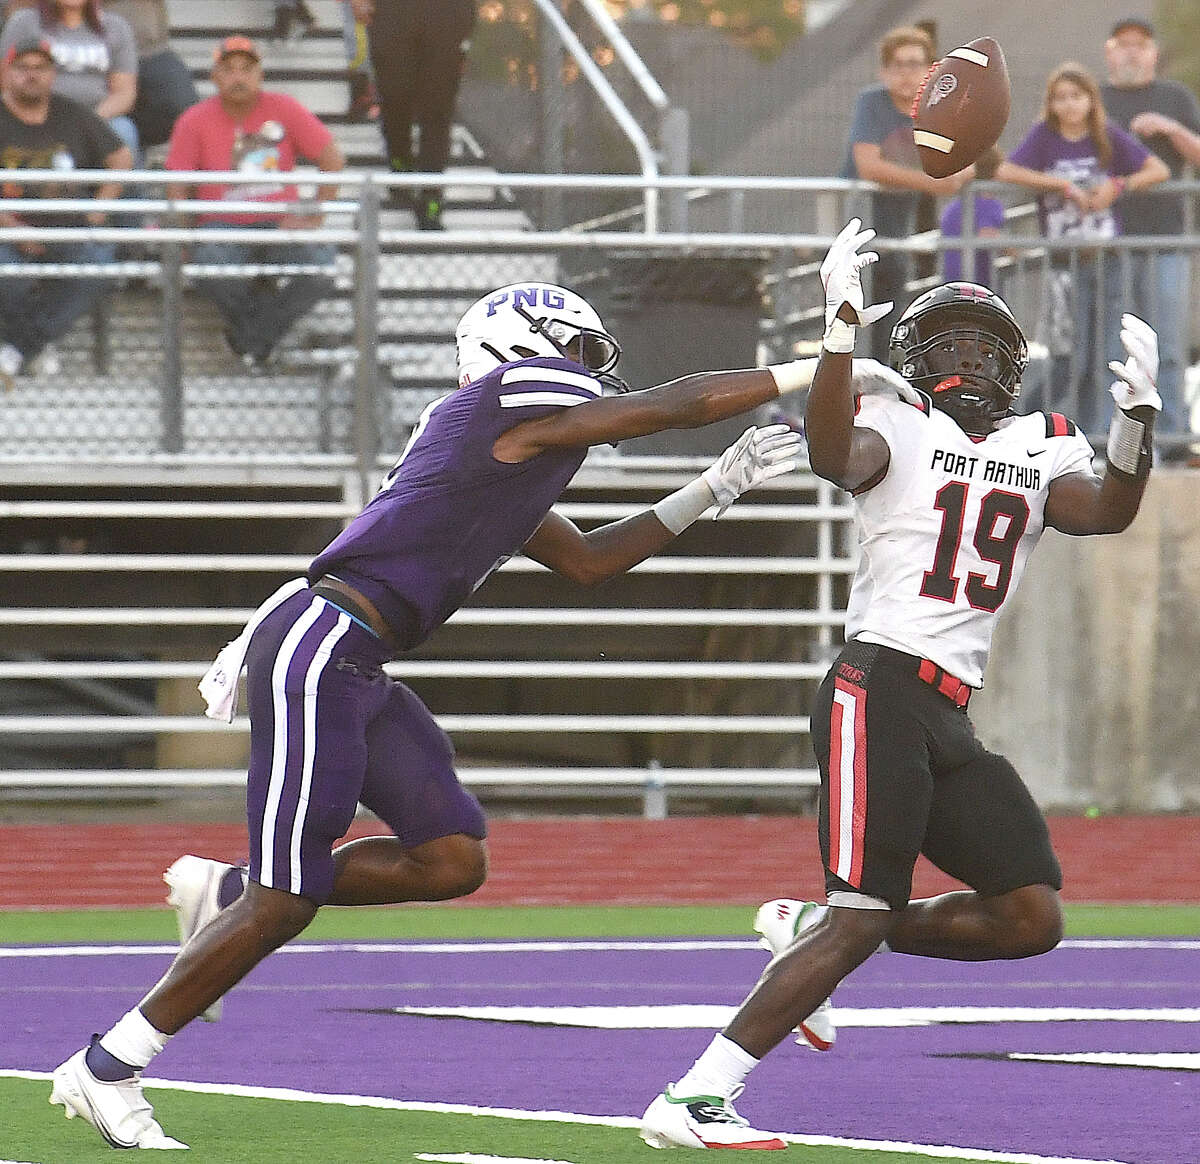 Port Neches-Groves' Torryann Hinton pushes Port Arthur Memorial's #19 as he tries to complete the pass for the touchdown during their season opener Friday. Photo made Friday, August 26, 2022 Kim Brent/Beaumont Enterprise